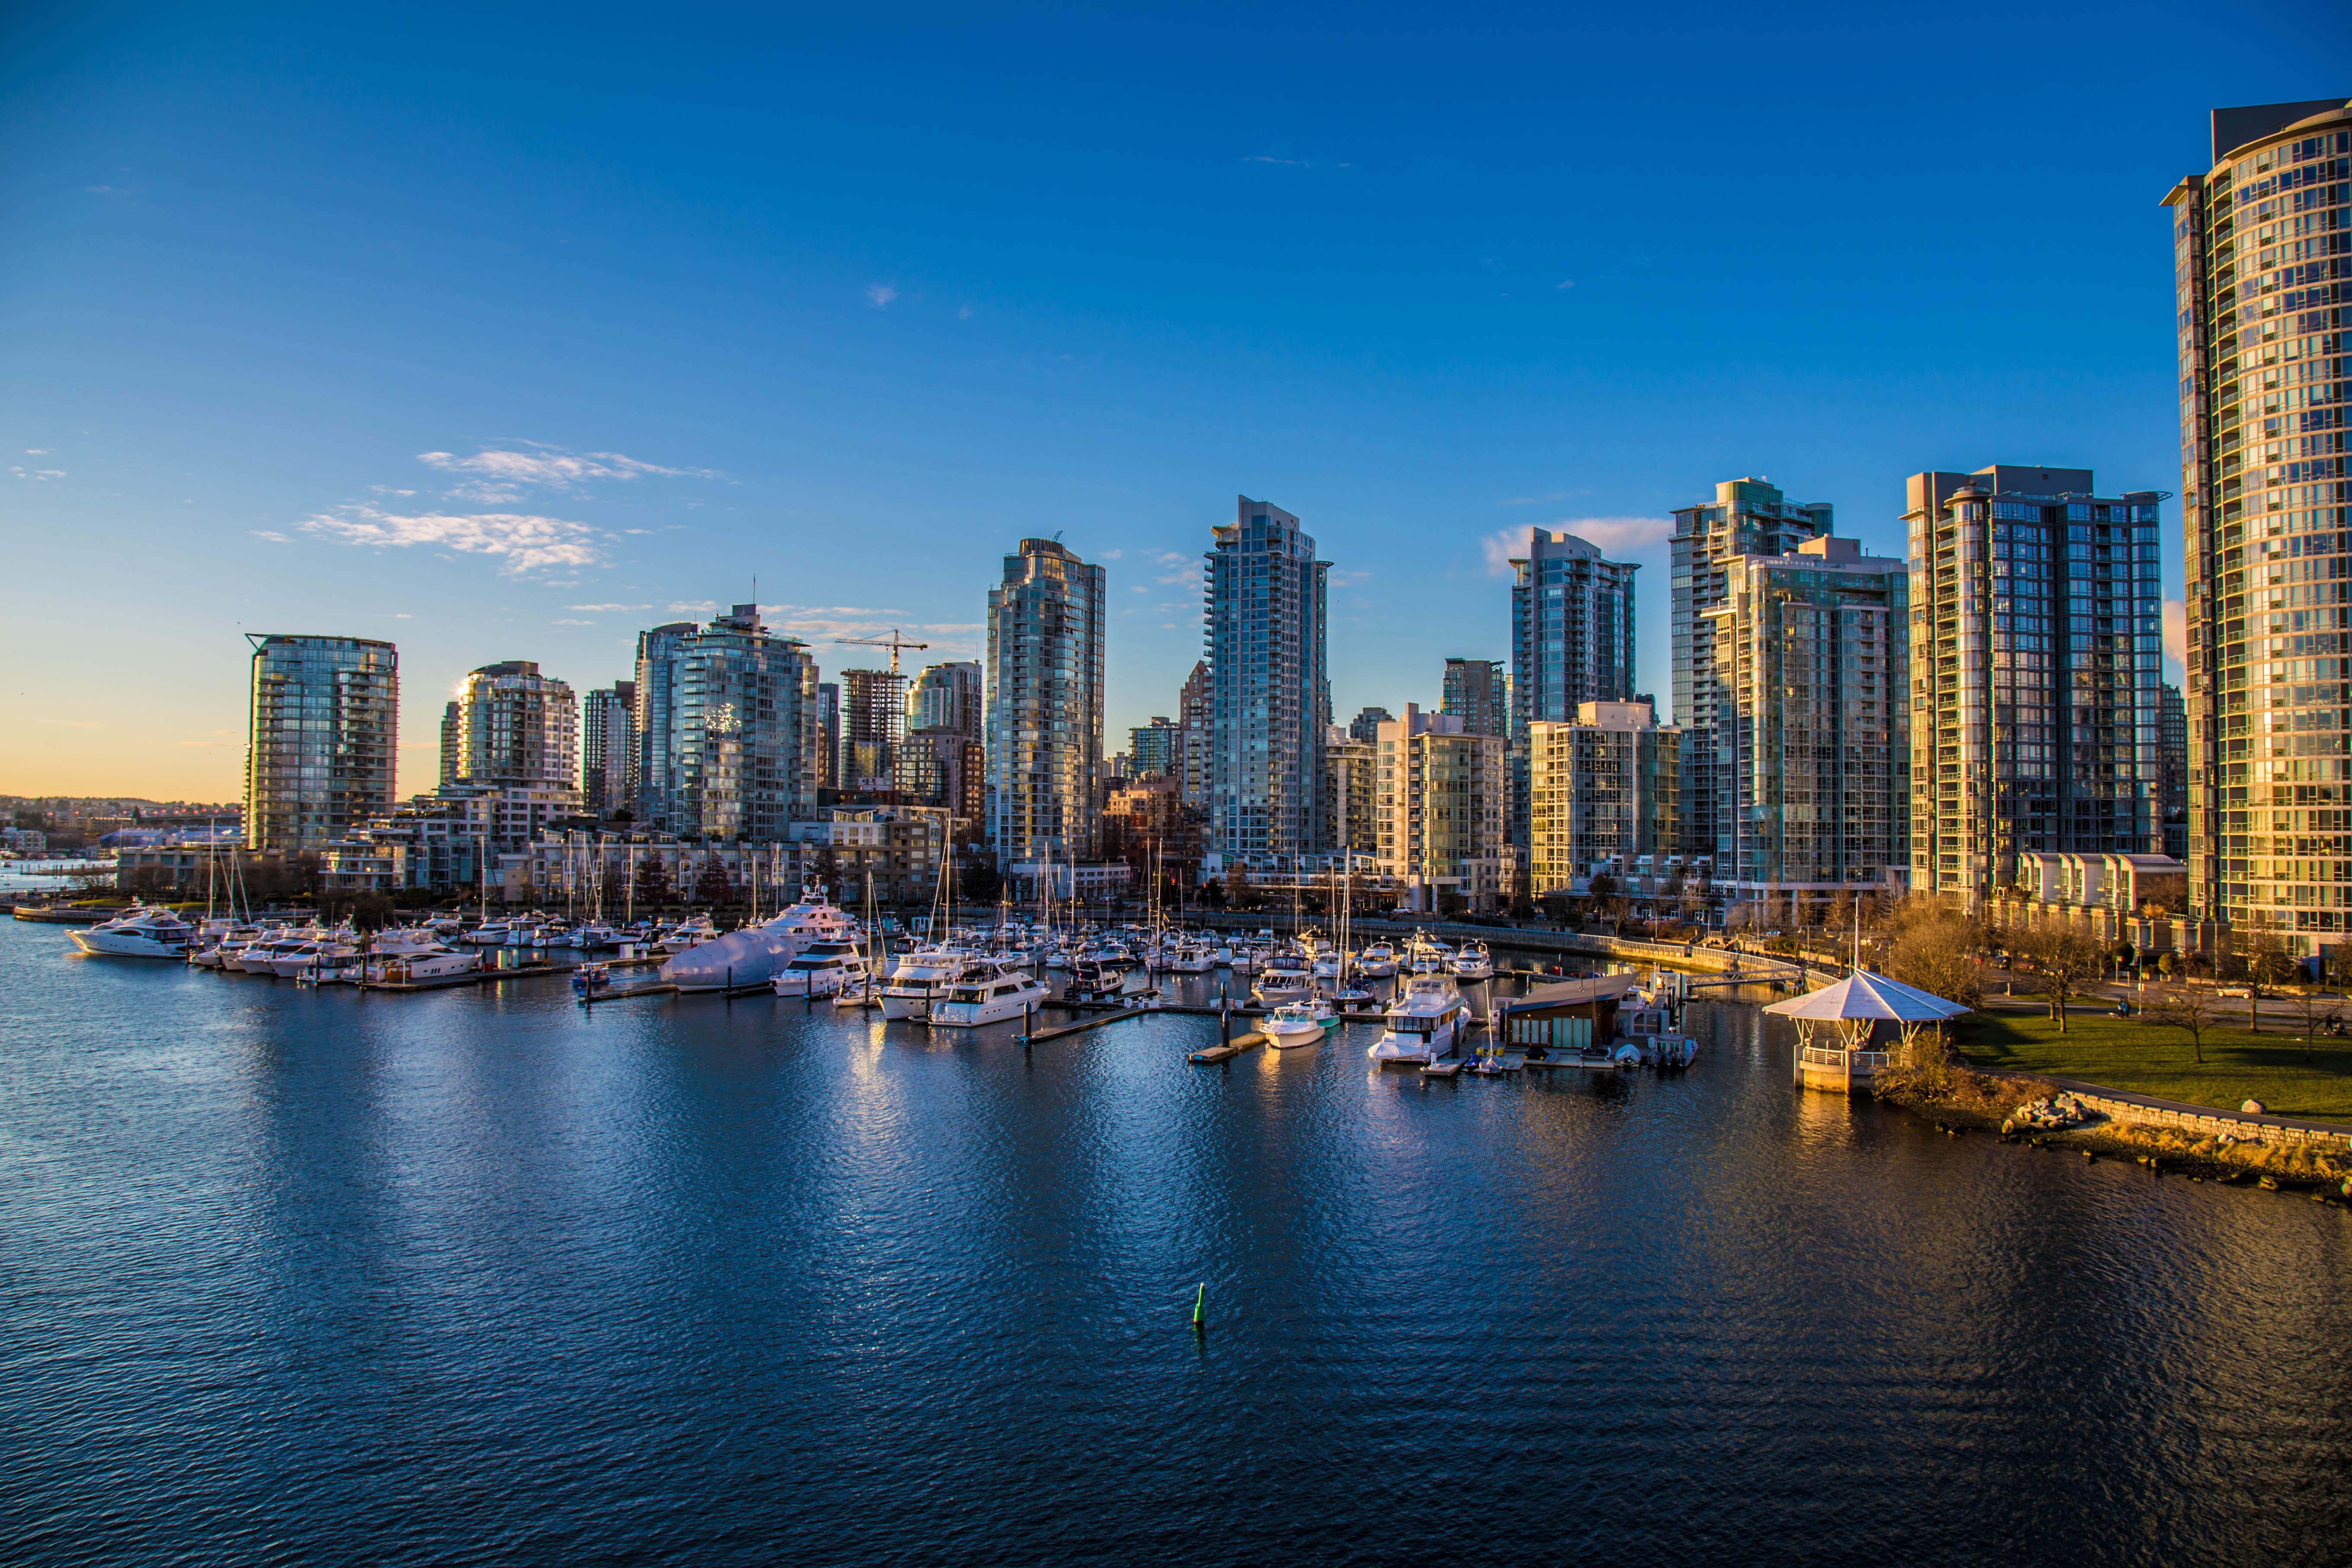 Condo Buildings for Sale in Yaletown, Vancouver